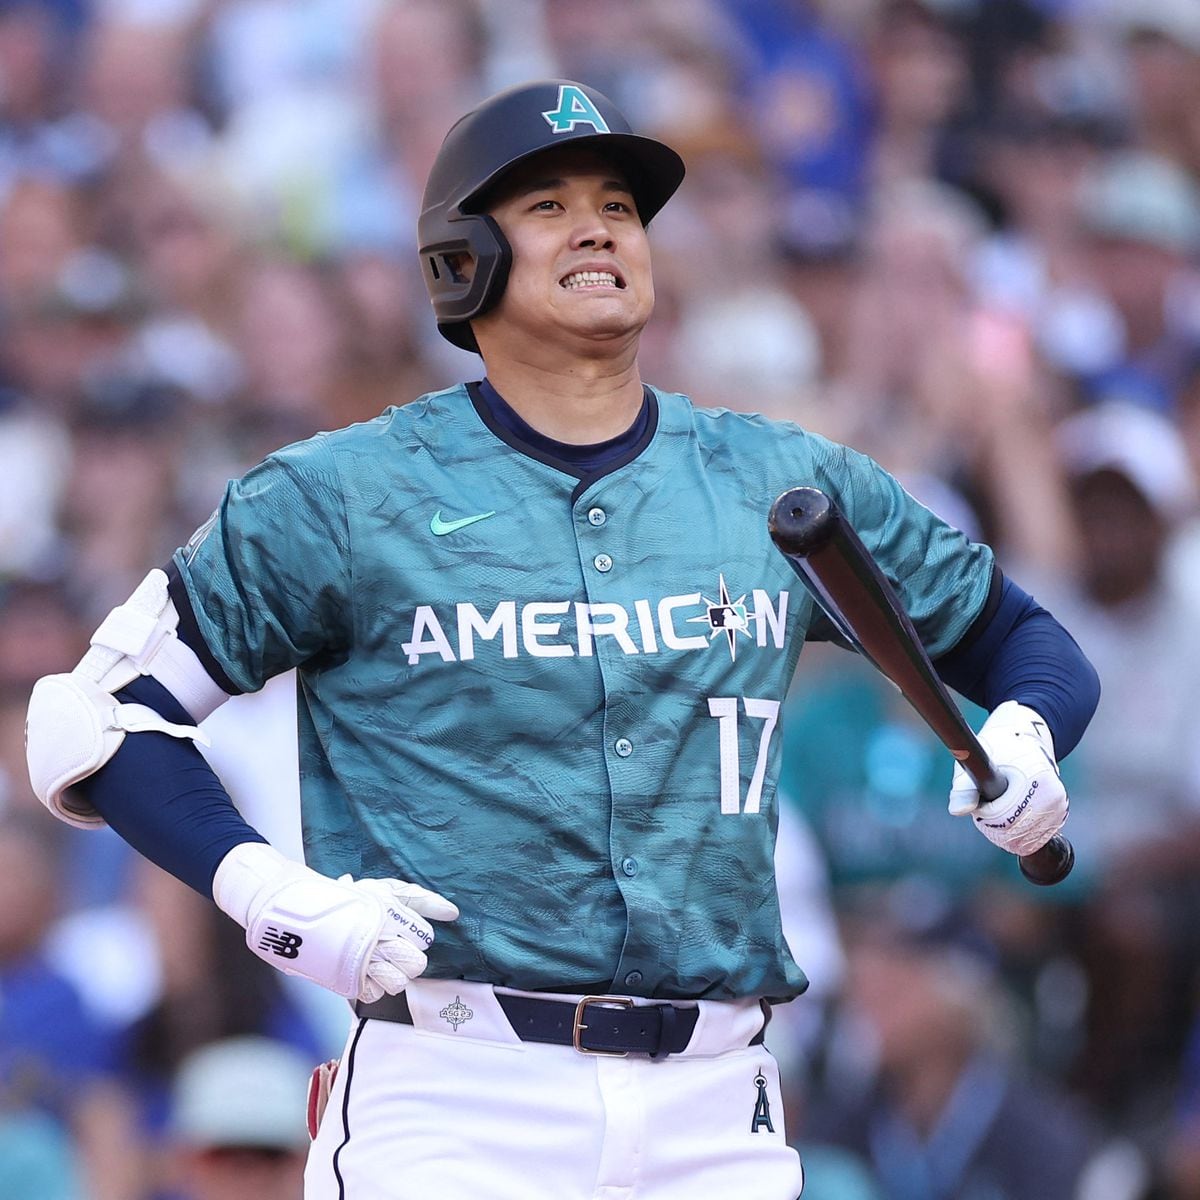 New York Yankees News/Rumors: With the Yankees quest for a catcher